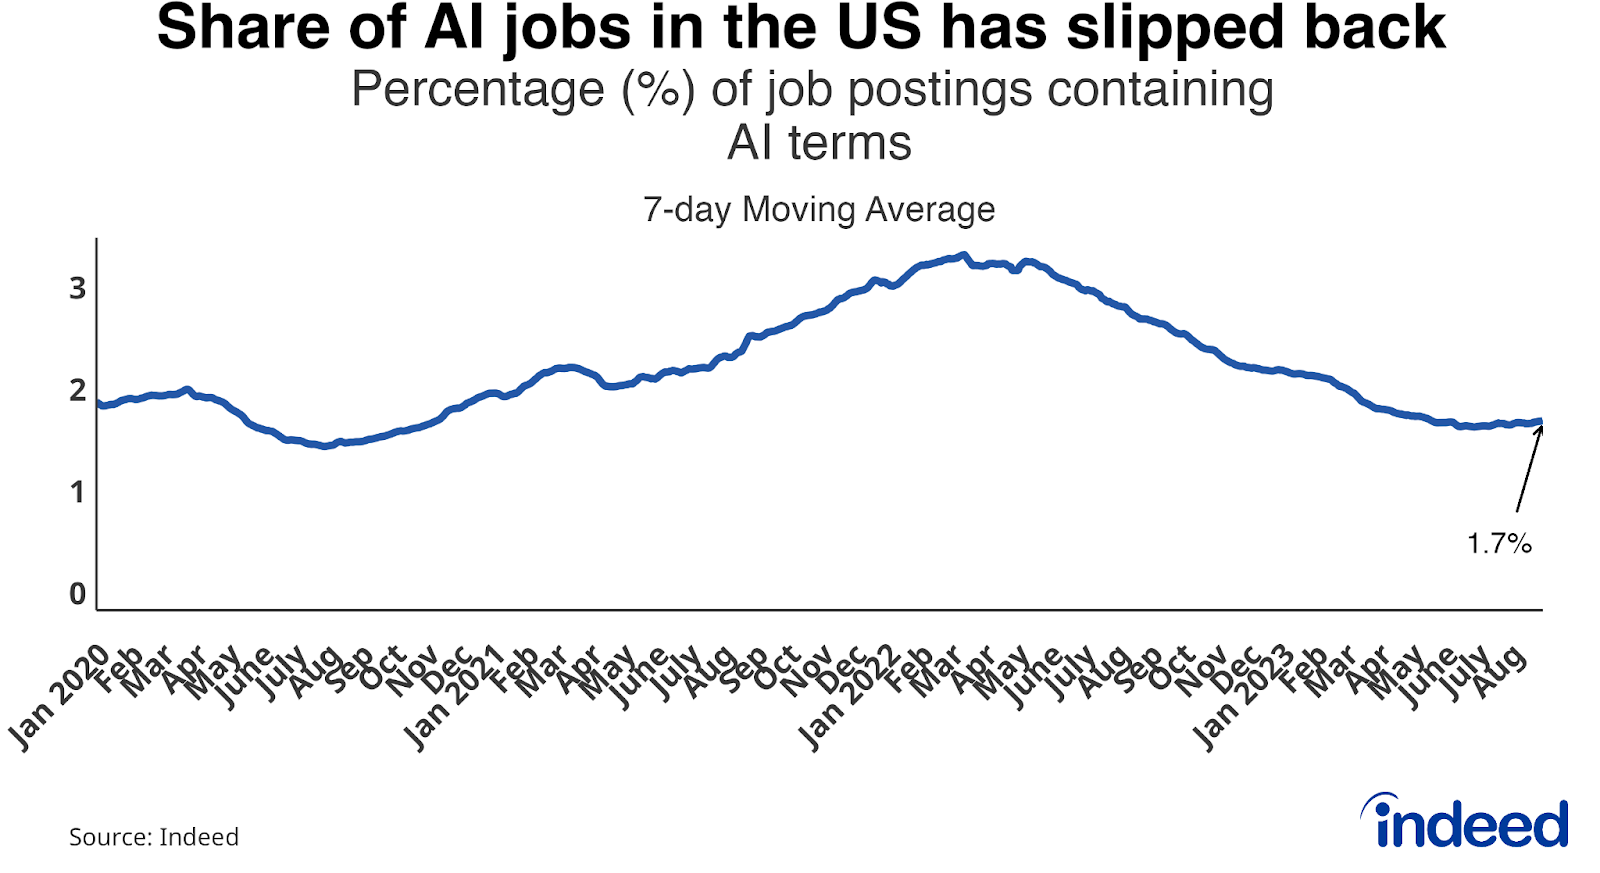 Line graph titled “Share of AI jobs in the US has slipped back.” With a vertical axis ranging from 0 to 3, and a horizontal axis ranging from Jan 2020 to Aug 2023, the graph shows the percentage of job postings containing AI terms. The share of all jobs that are broader “AI” jobs has fallen from 3.3% in March 2022 to 1.7% as of the end of August 2023.